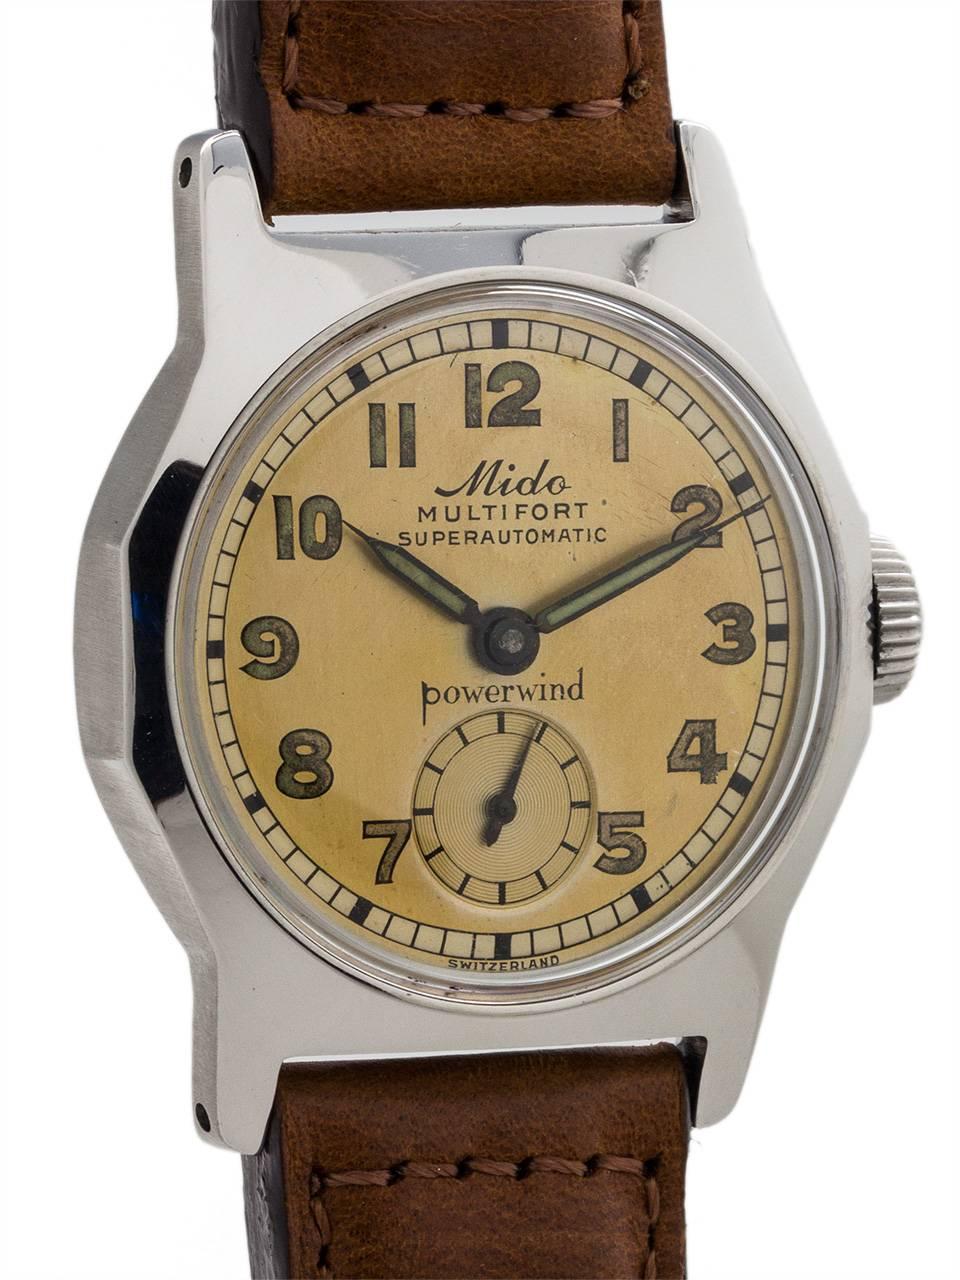 
Great condition example vintage Mido Multifort automatic circa 1950’s. Featuring medium size 30mm diameter cushion shaped case with extend lugs, beautiful condition original 2 tone warmly patina’d dial with radium luminous numbers and hands, with